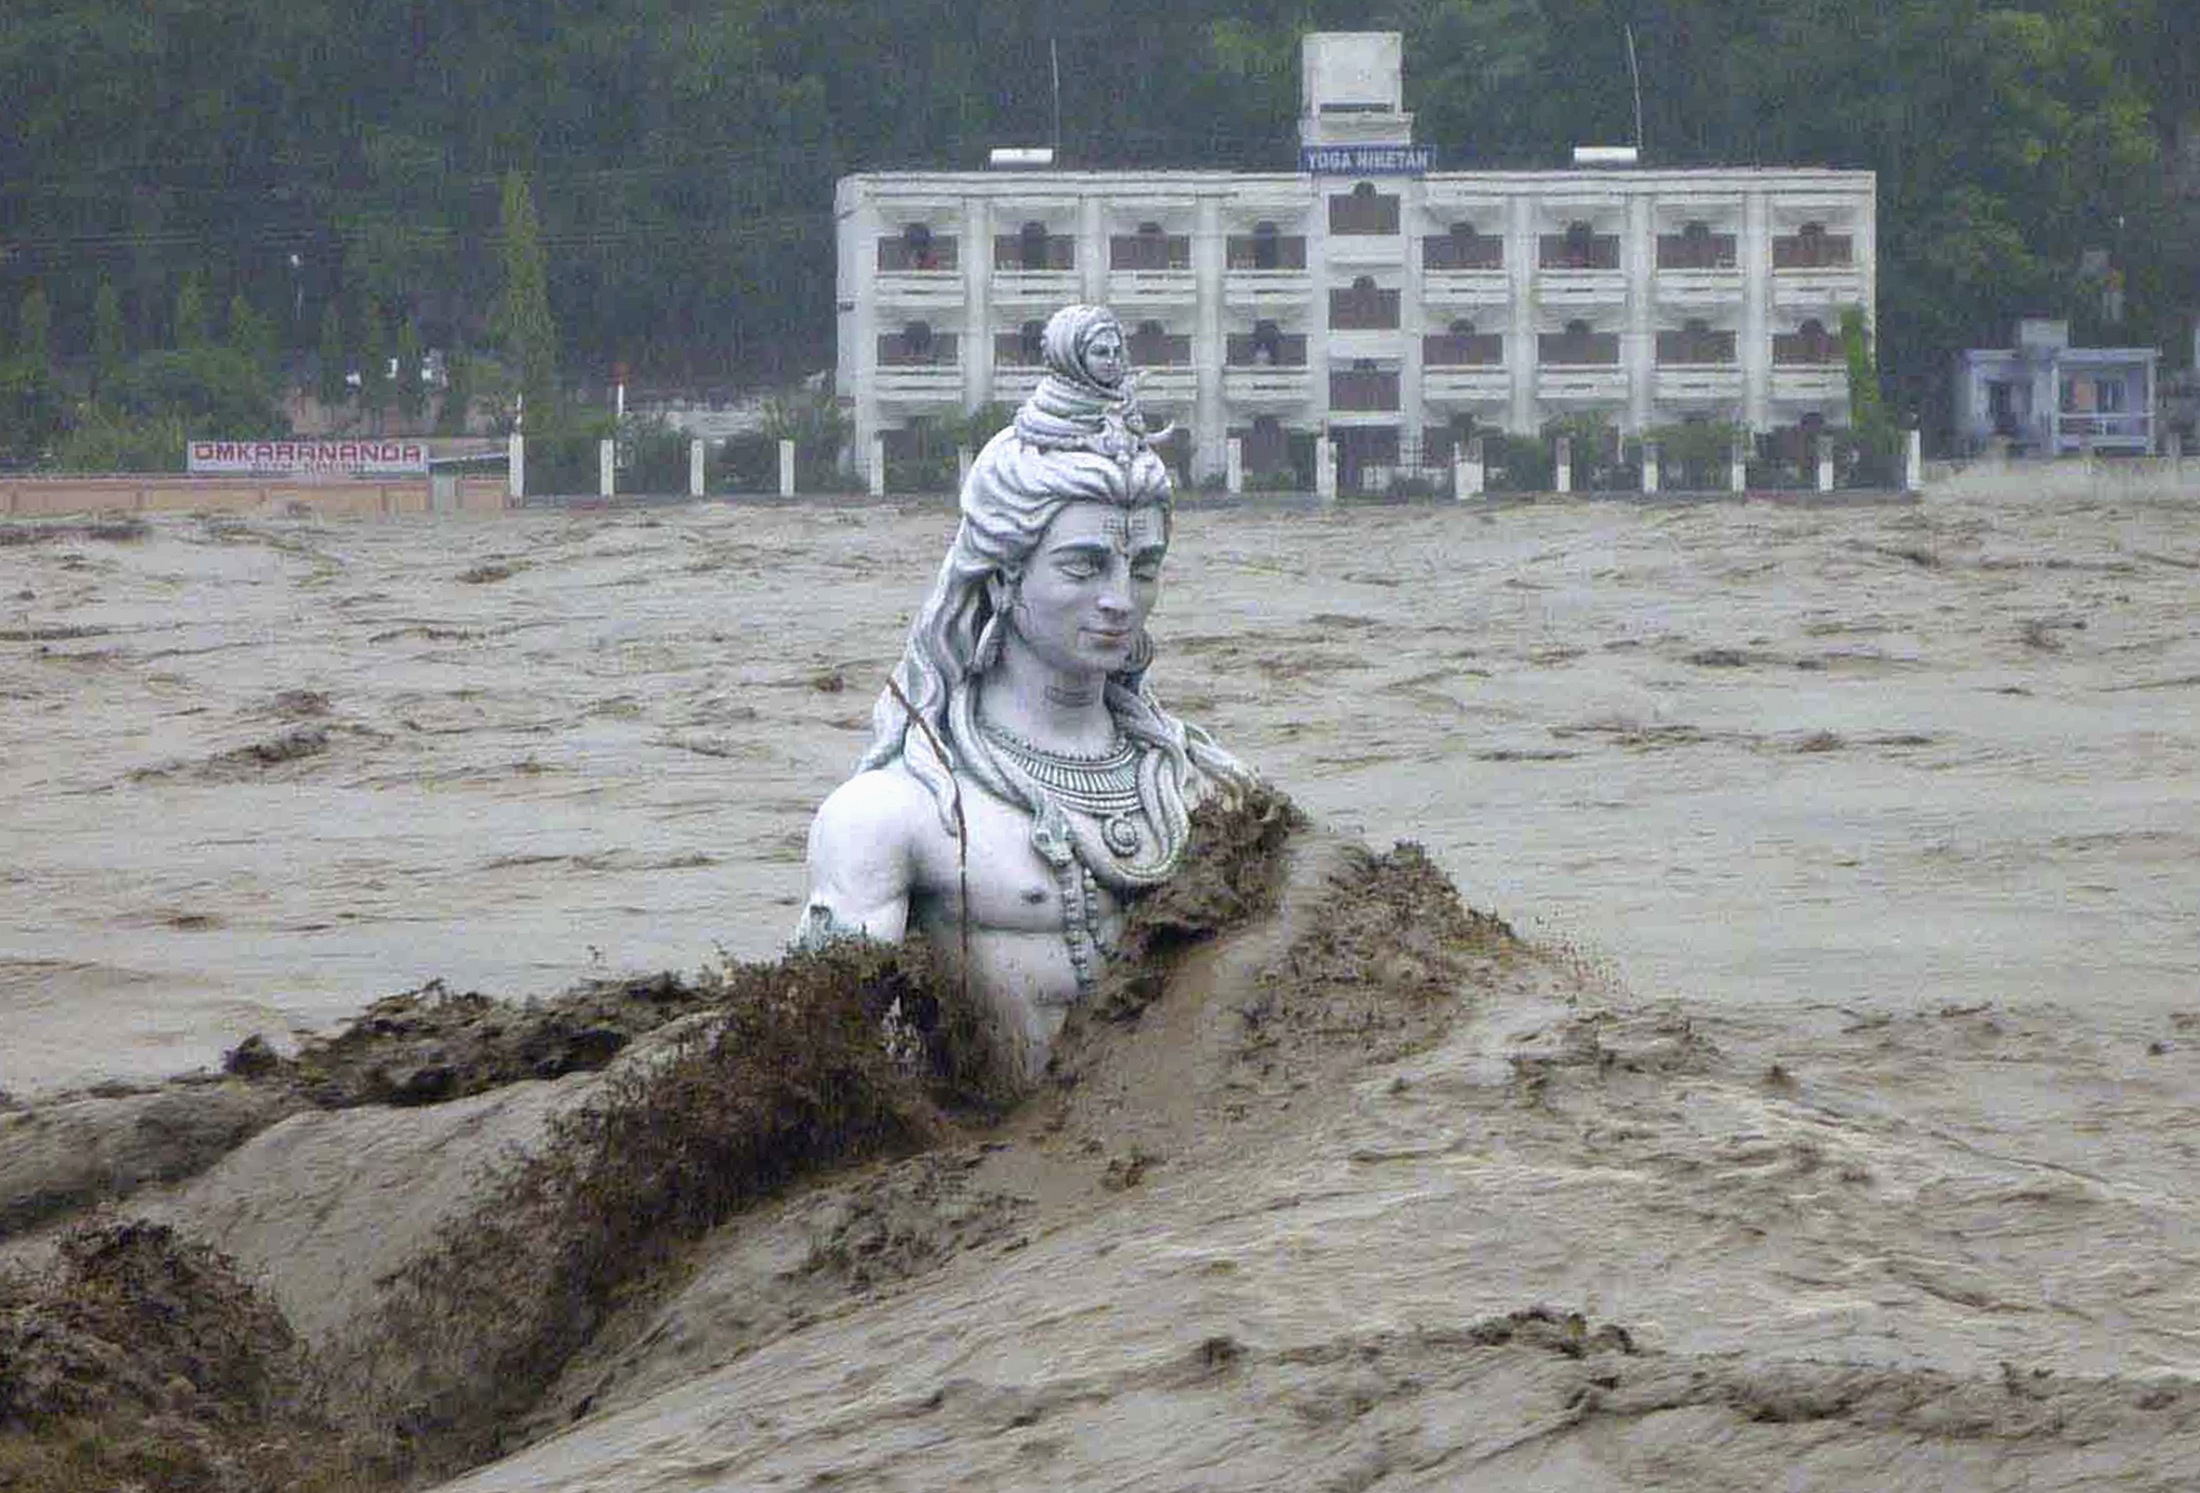 A submerged statue of the Hindu Lord Shiva amid the flood waters of the river Ganges, June 17, 2013